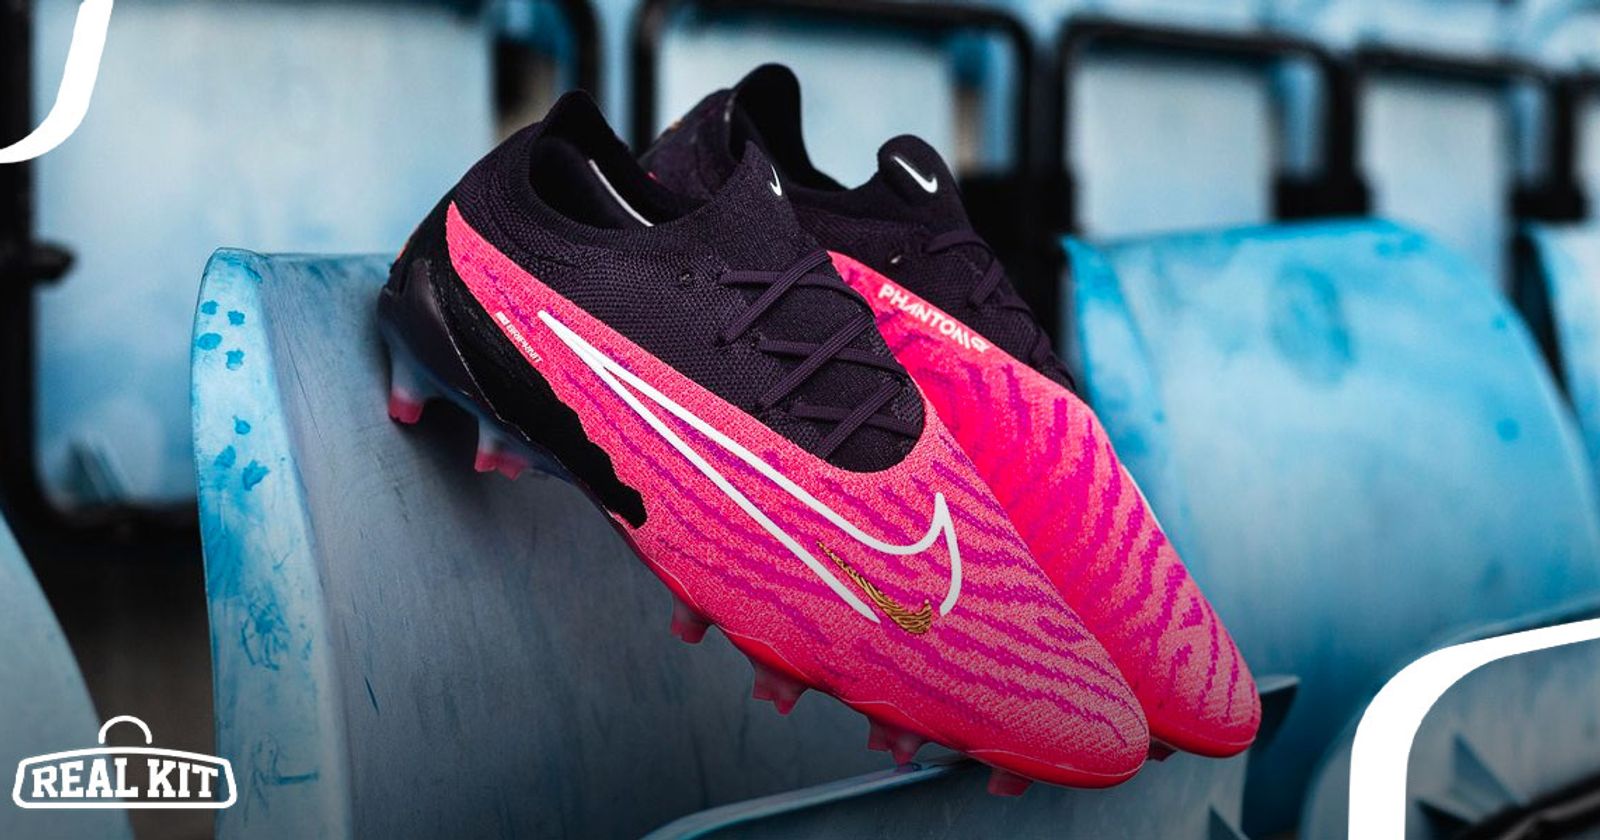 The Best Nike Football Boots Of 2023